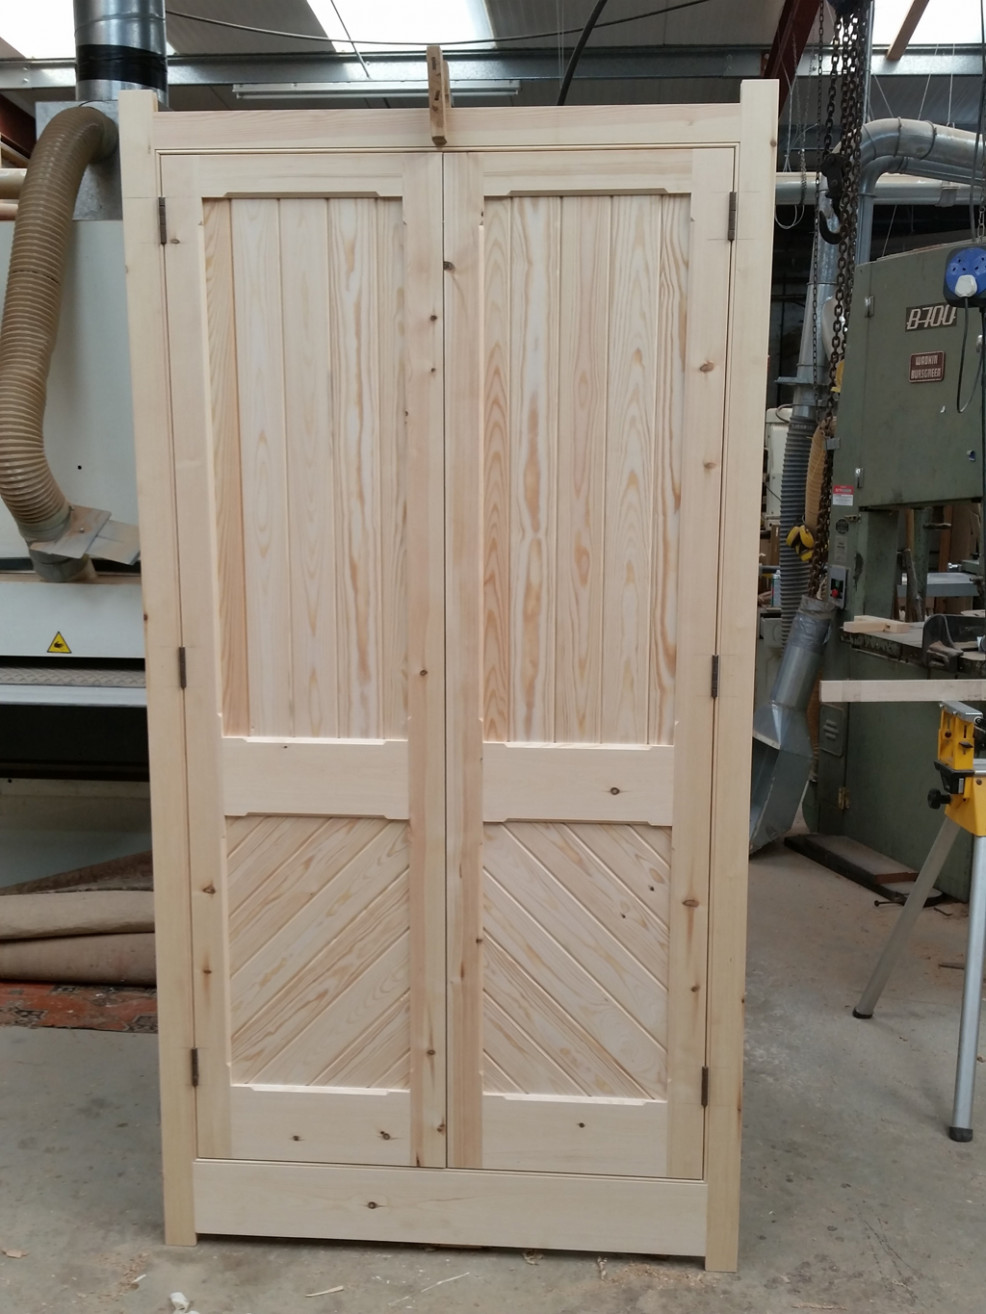 Victorian-style cupboard prior to finishing